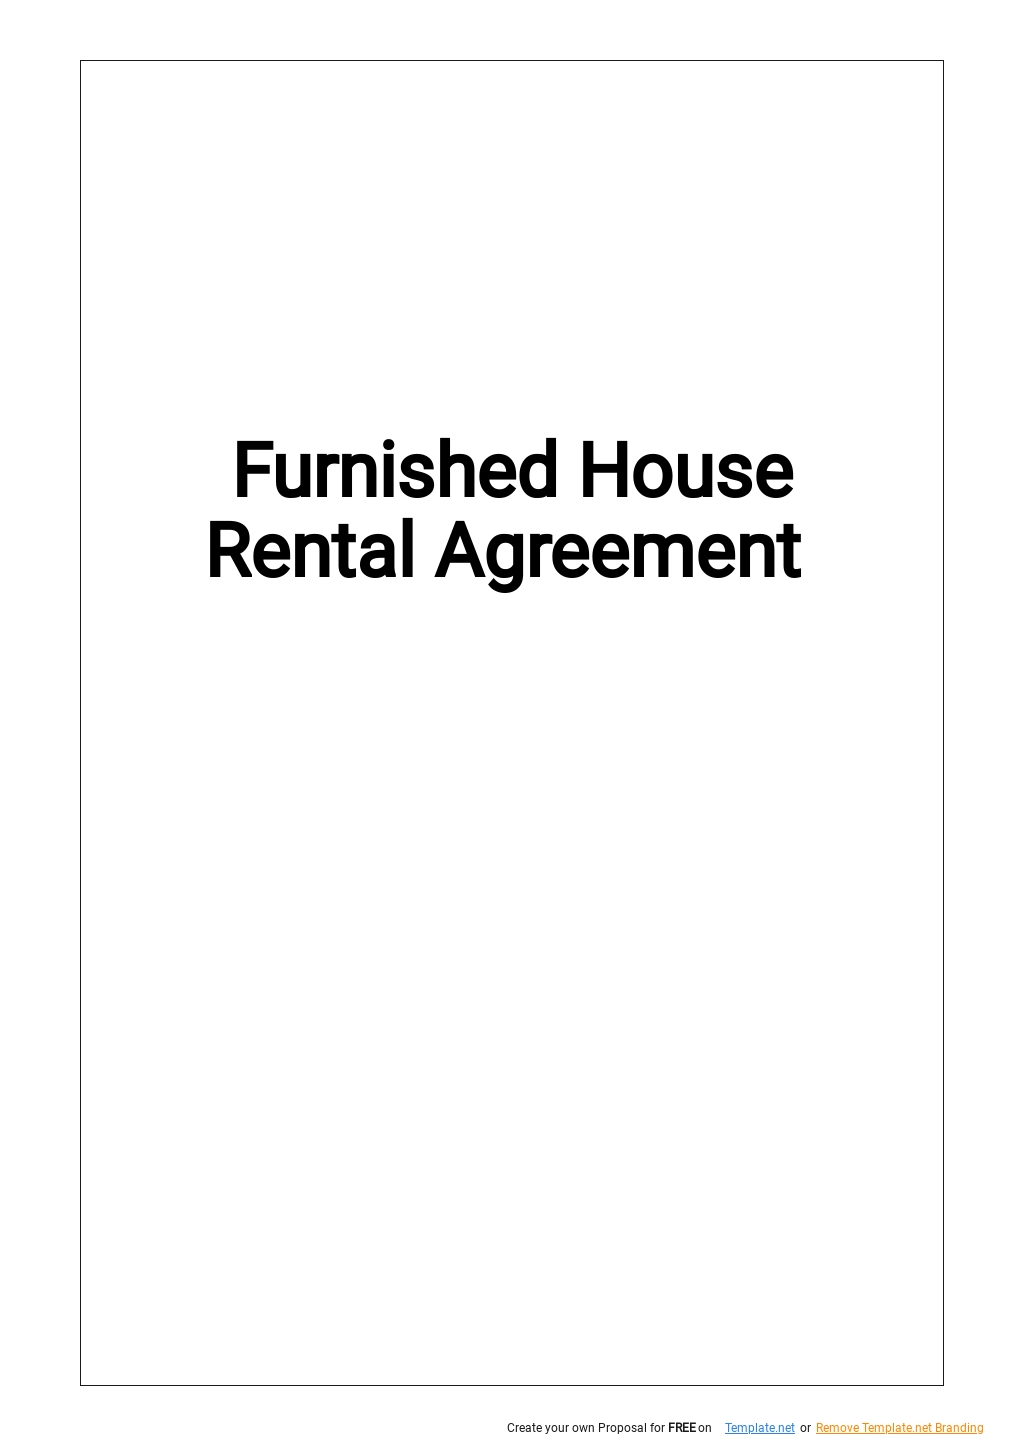 house-rental-agreement-template-google-docs-word-apple-pages-template